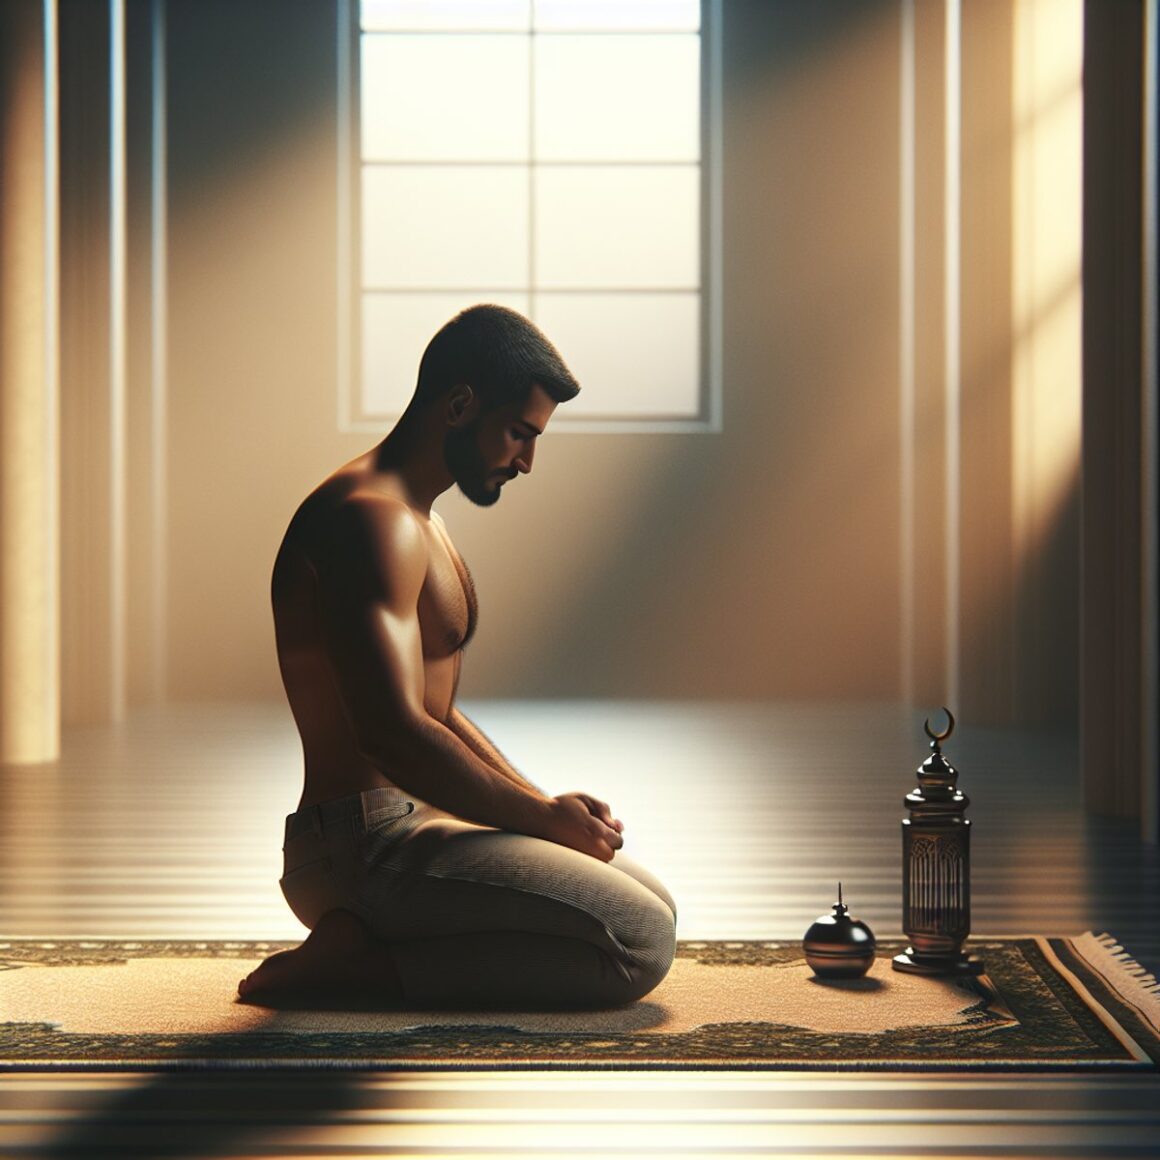 A Hispanic man kneels on a prayer mat in soft, illuminated surroundings, exuding tranquility and spirituality.